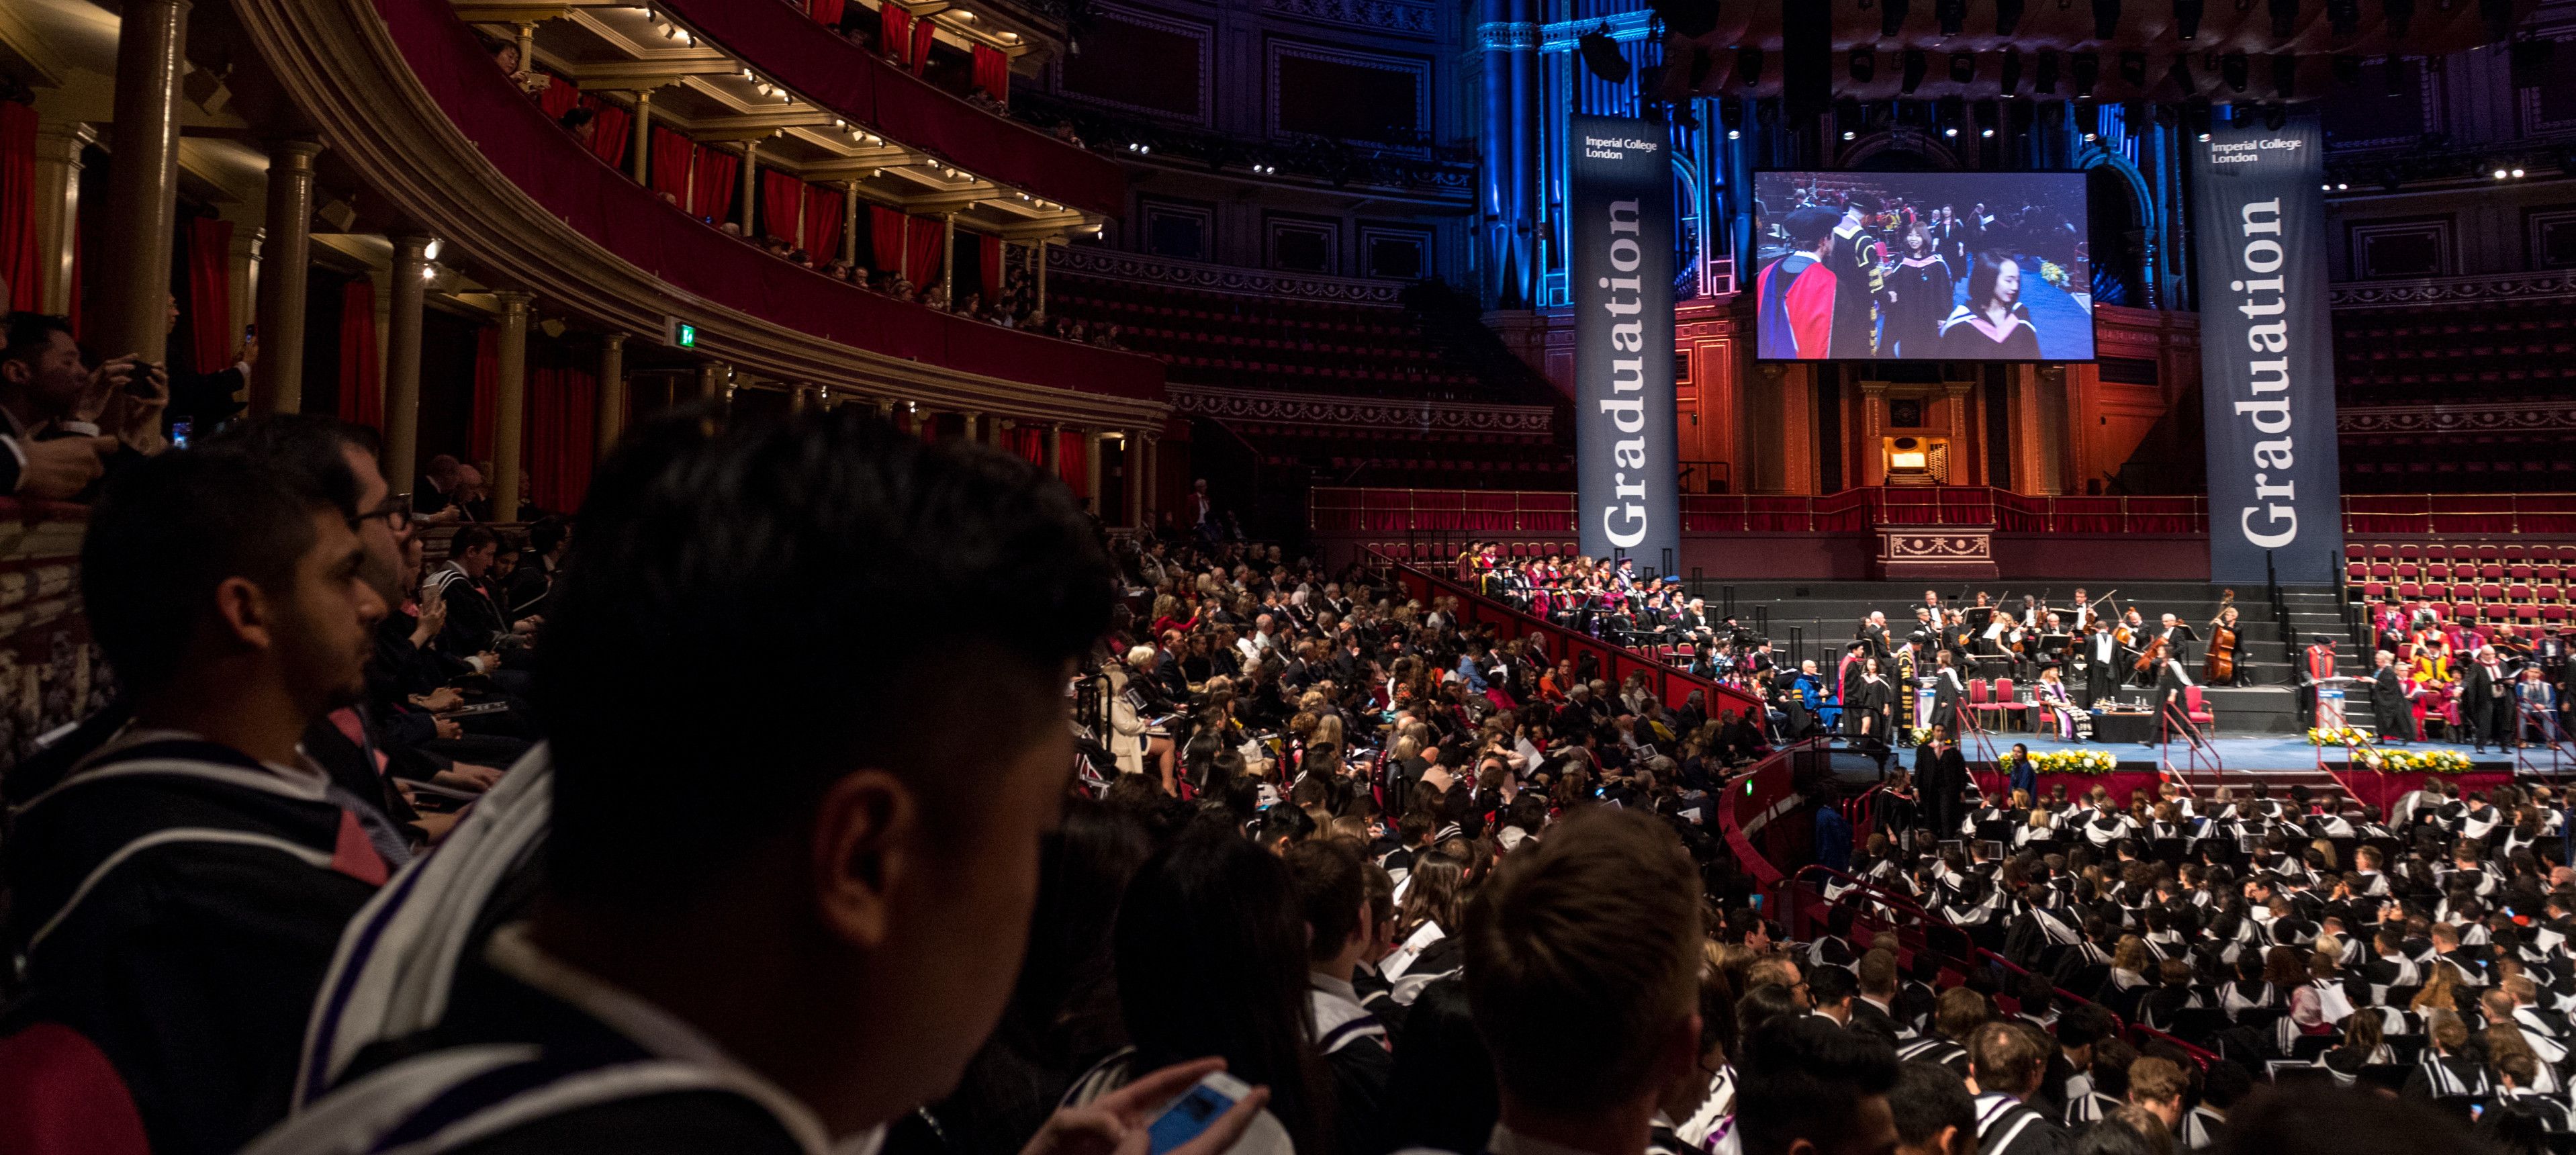 An Imperial graduation ceremony in the Royal Albert Hall